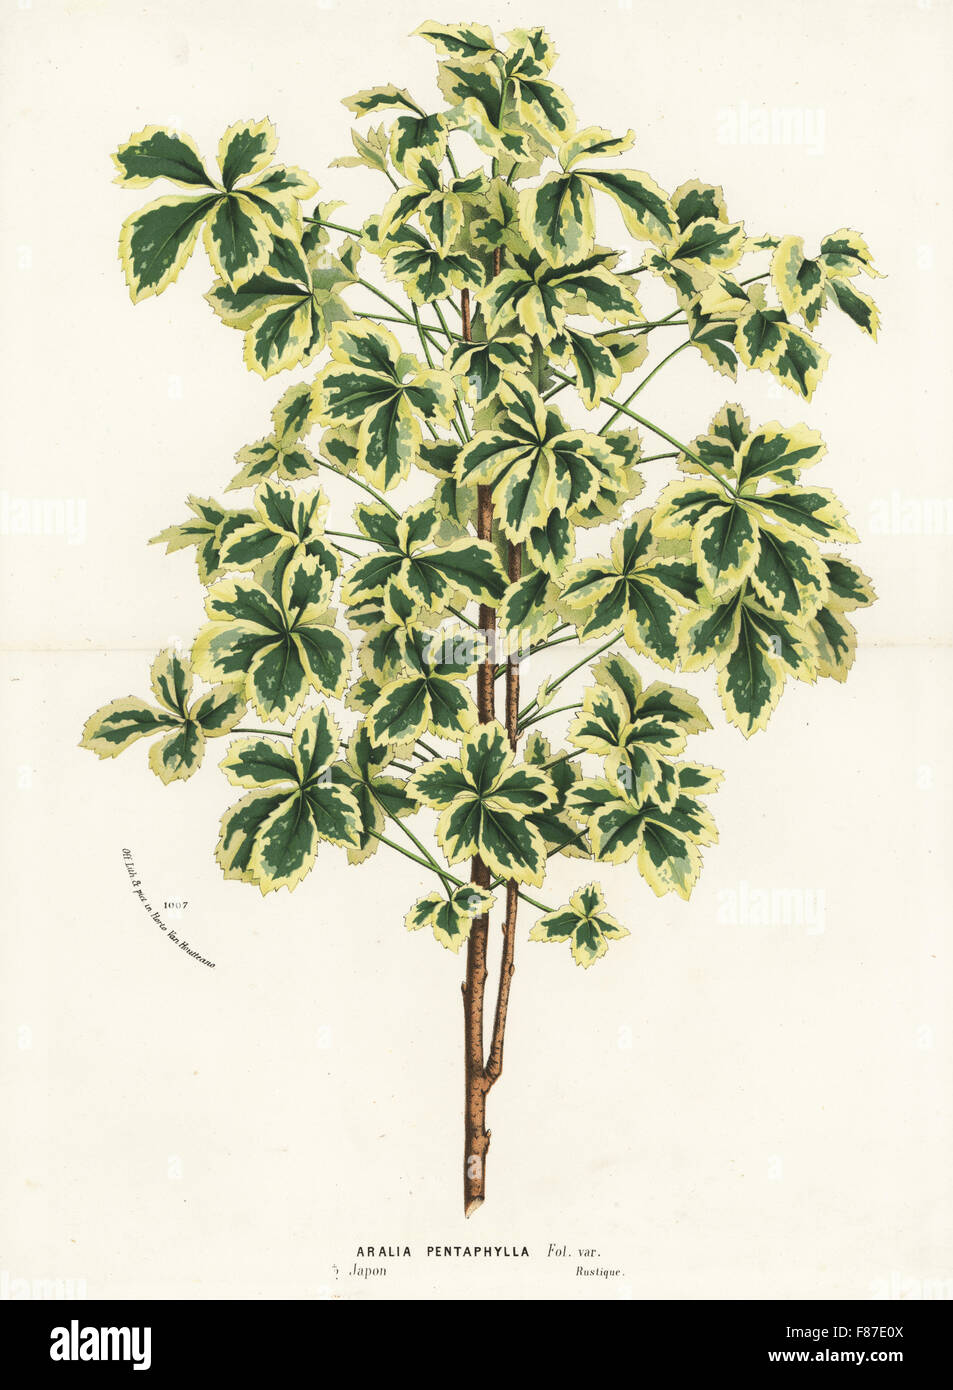 Variegated five-leaf aralia or hime ukogi, Eleutherococcus sieboldianus variegatus (Aralia pentaphylla fol. var.) Handcoloured lithograph from Louis van Houtte and Charles Lemaire's Flowers of the Gardens and Hothouses of Europe, Flore des Serres et des Jardins de l'Europe, Ghent, Belgium, 1874. Stock Photo